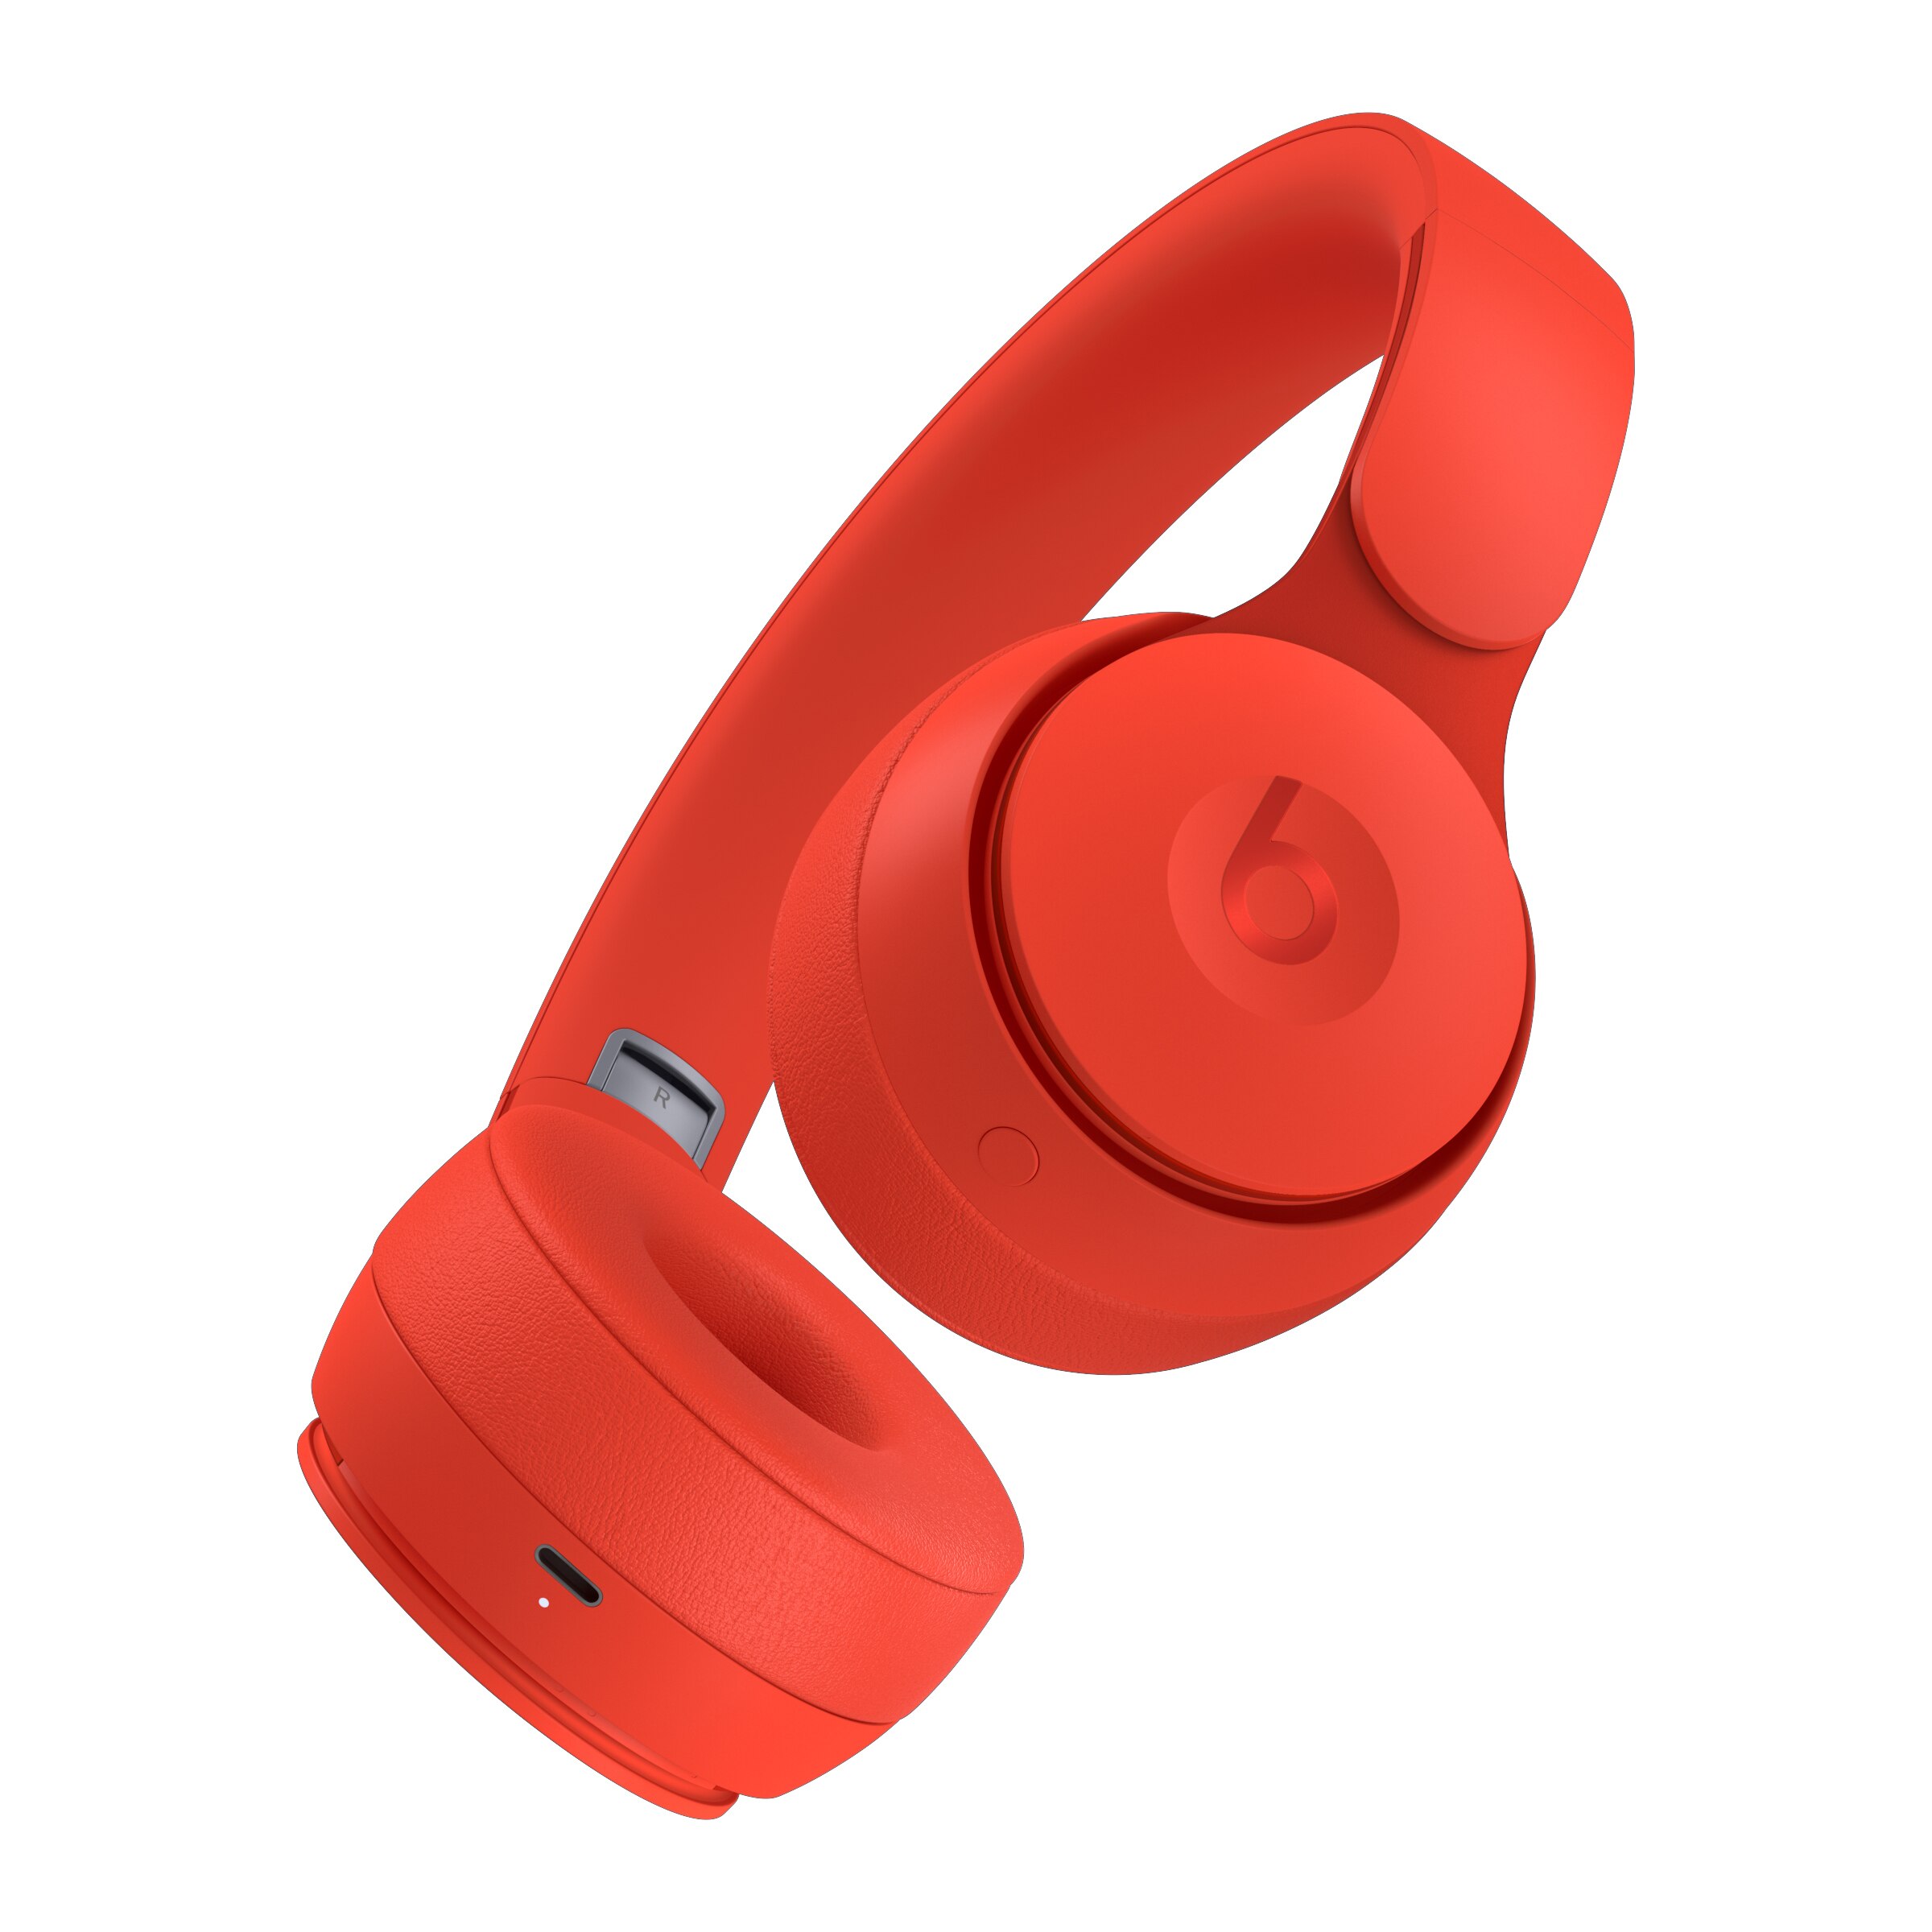 Beats by Dr. Dre Beats Solo Pro - Online Shopping for Canadians